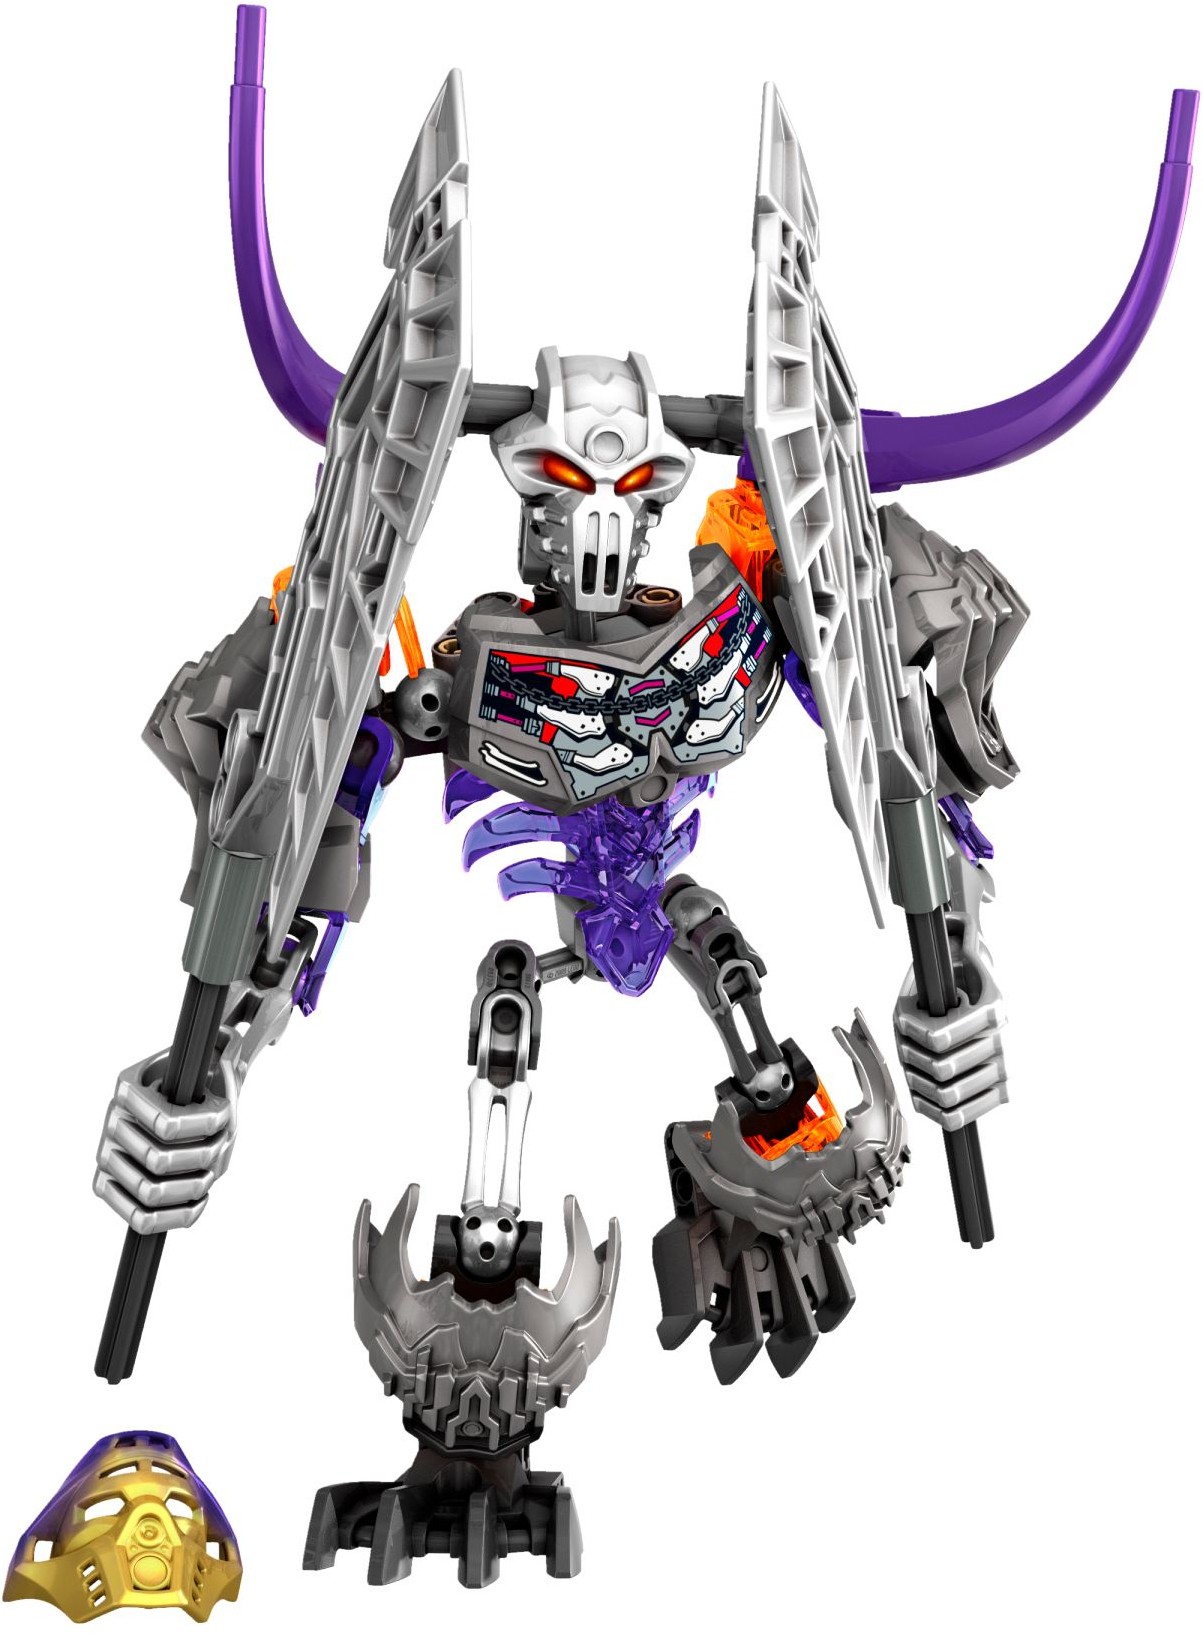 Technic and Bionicle